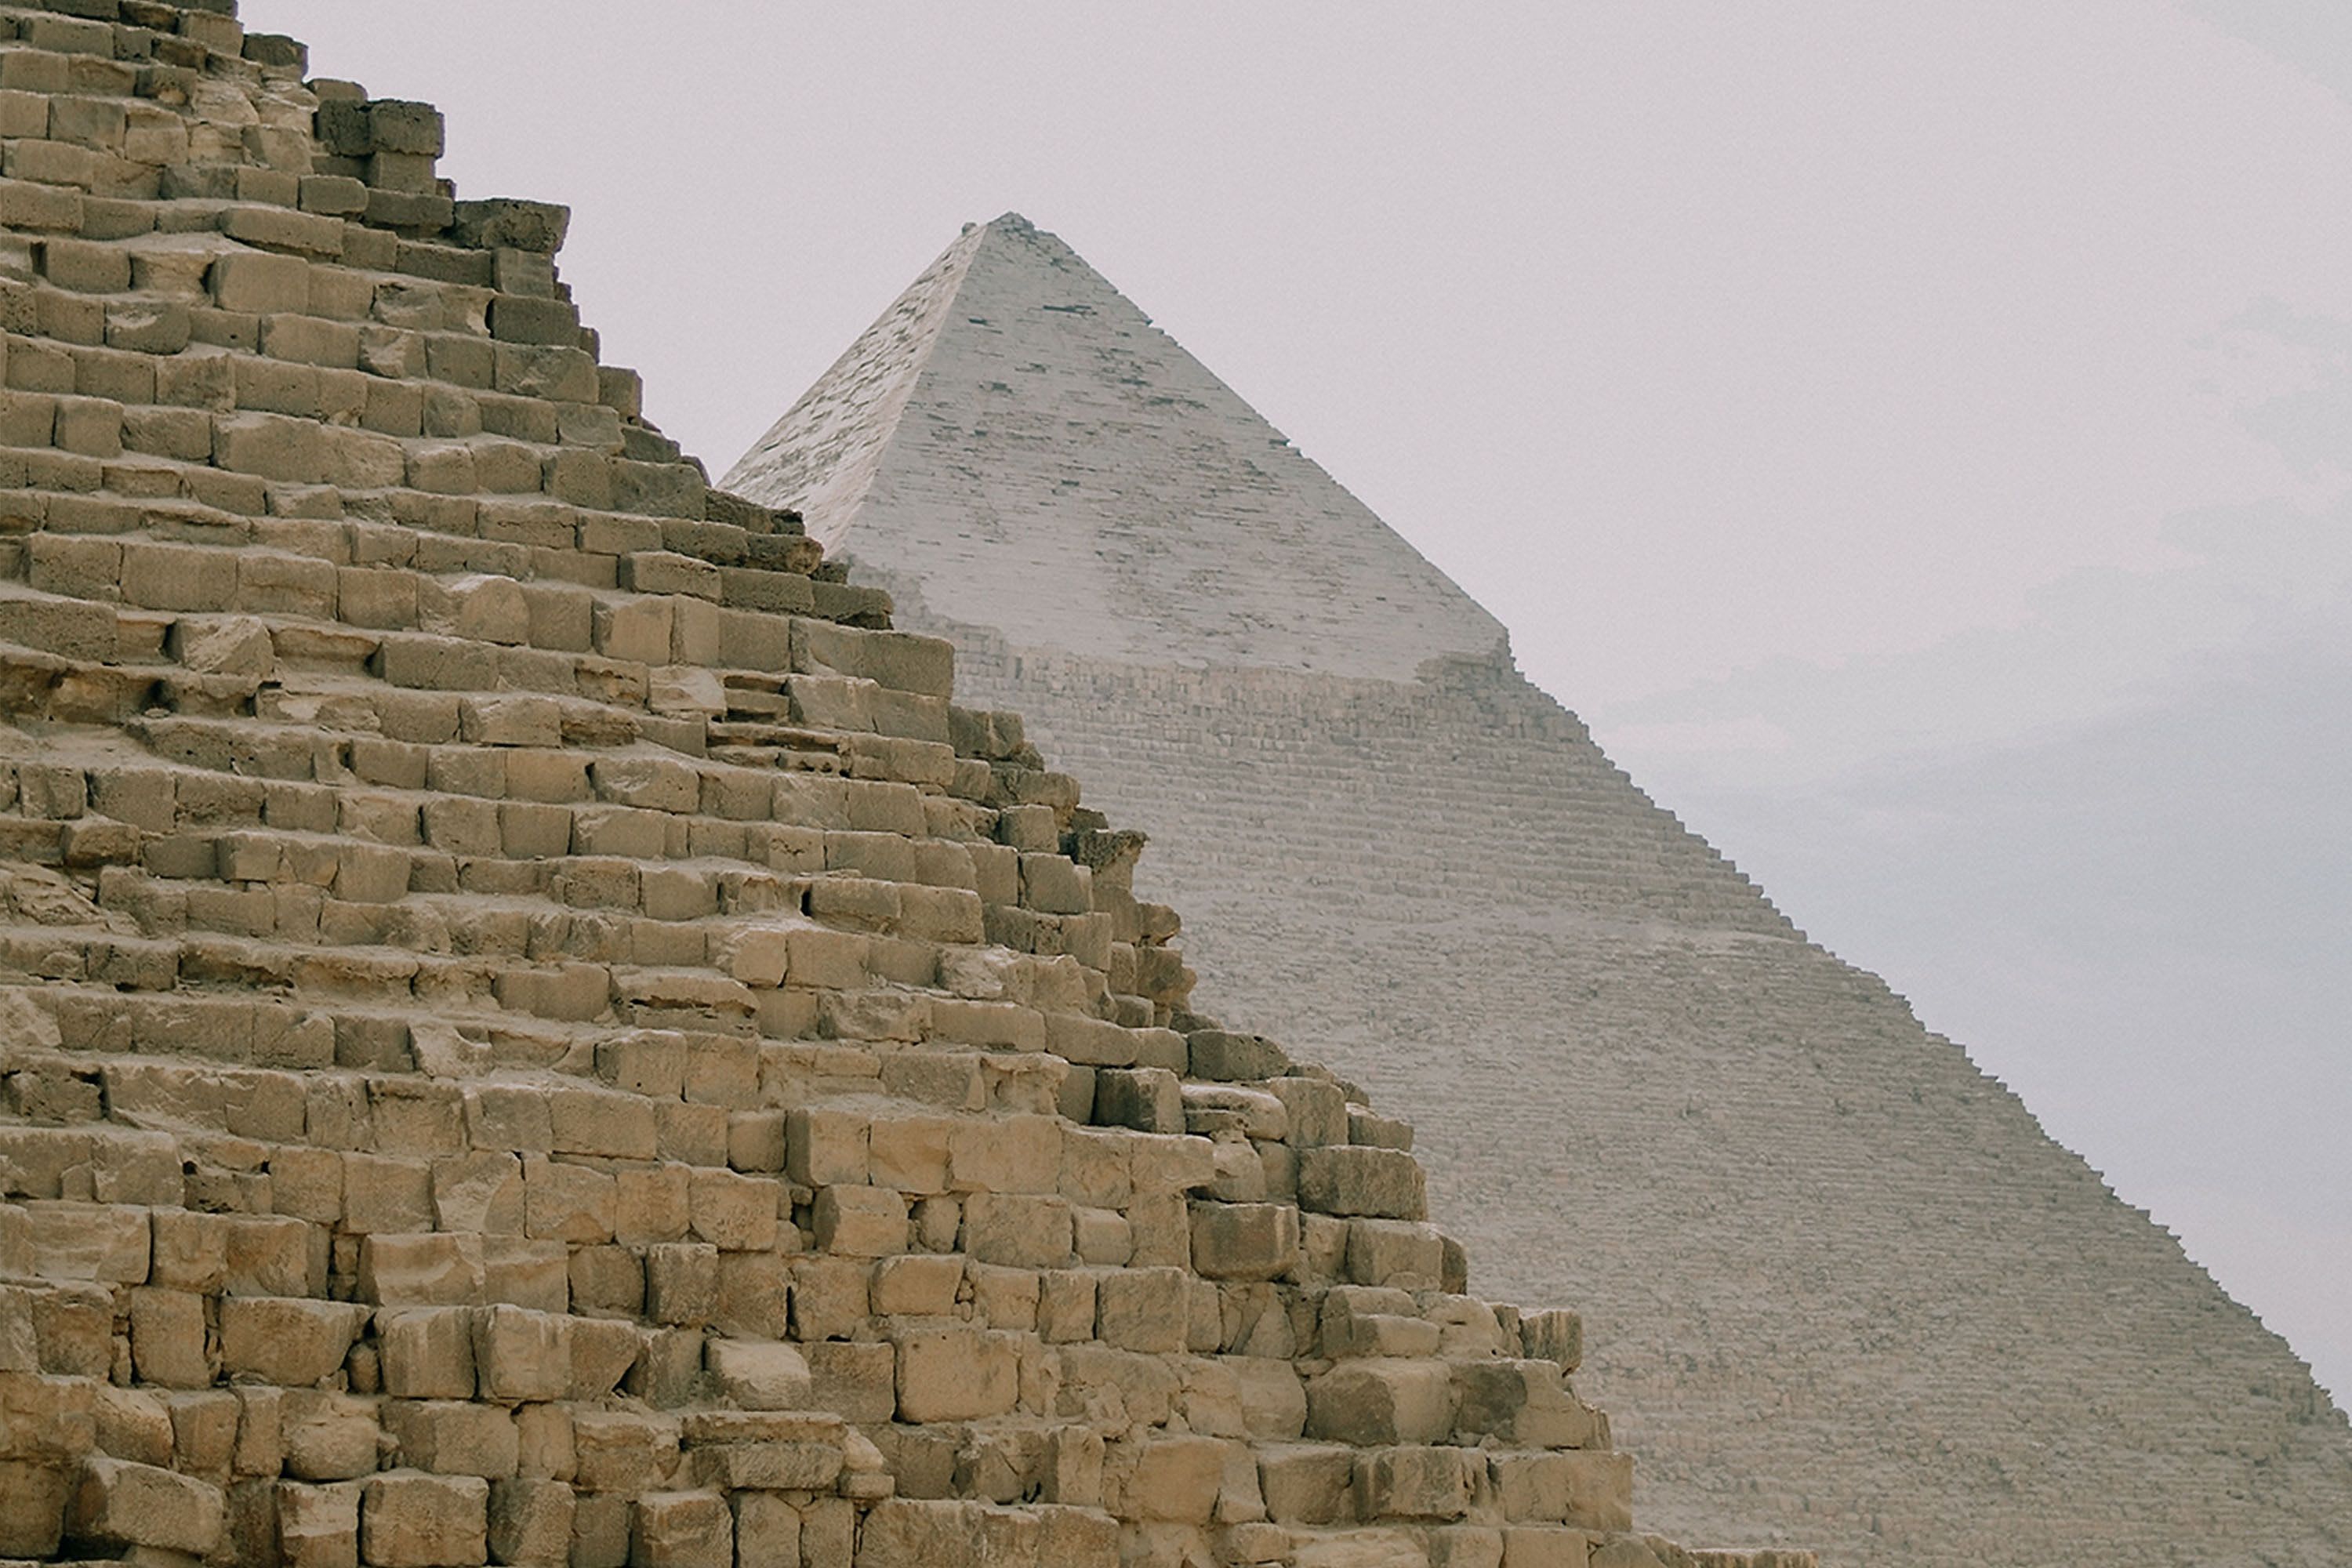 How were the Egyptian pyramids built according to scientists